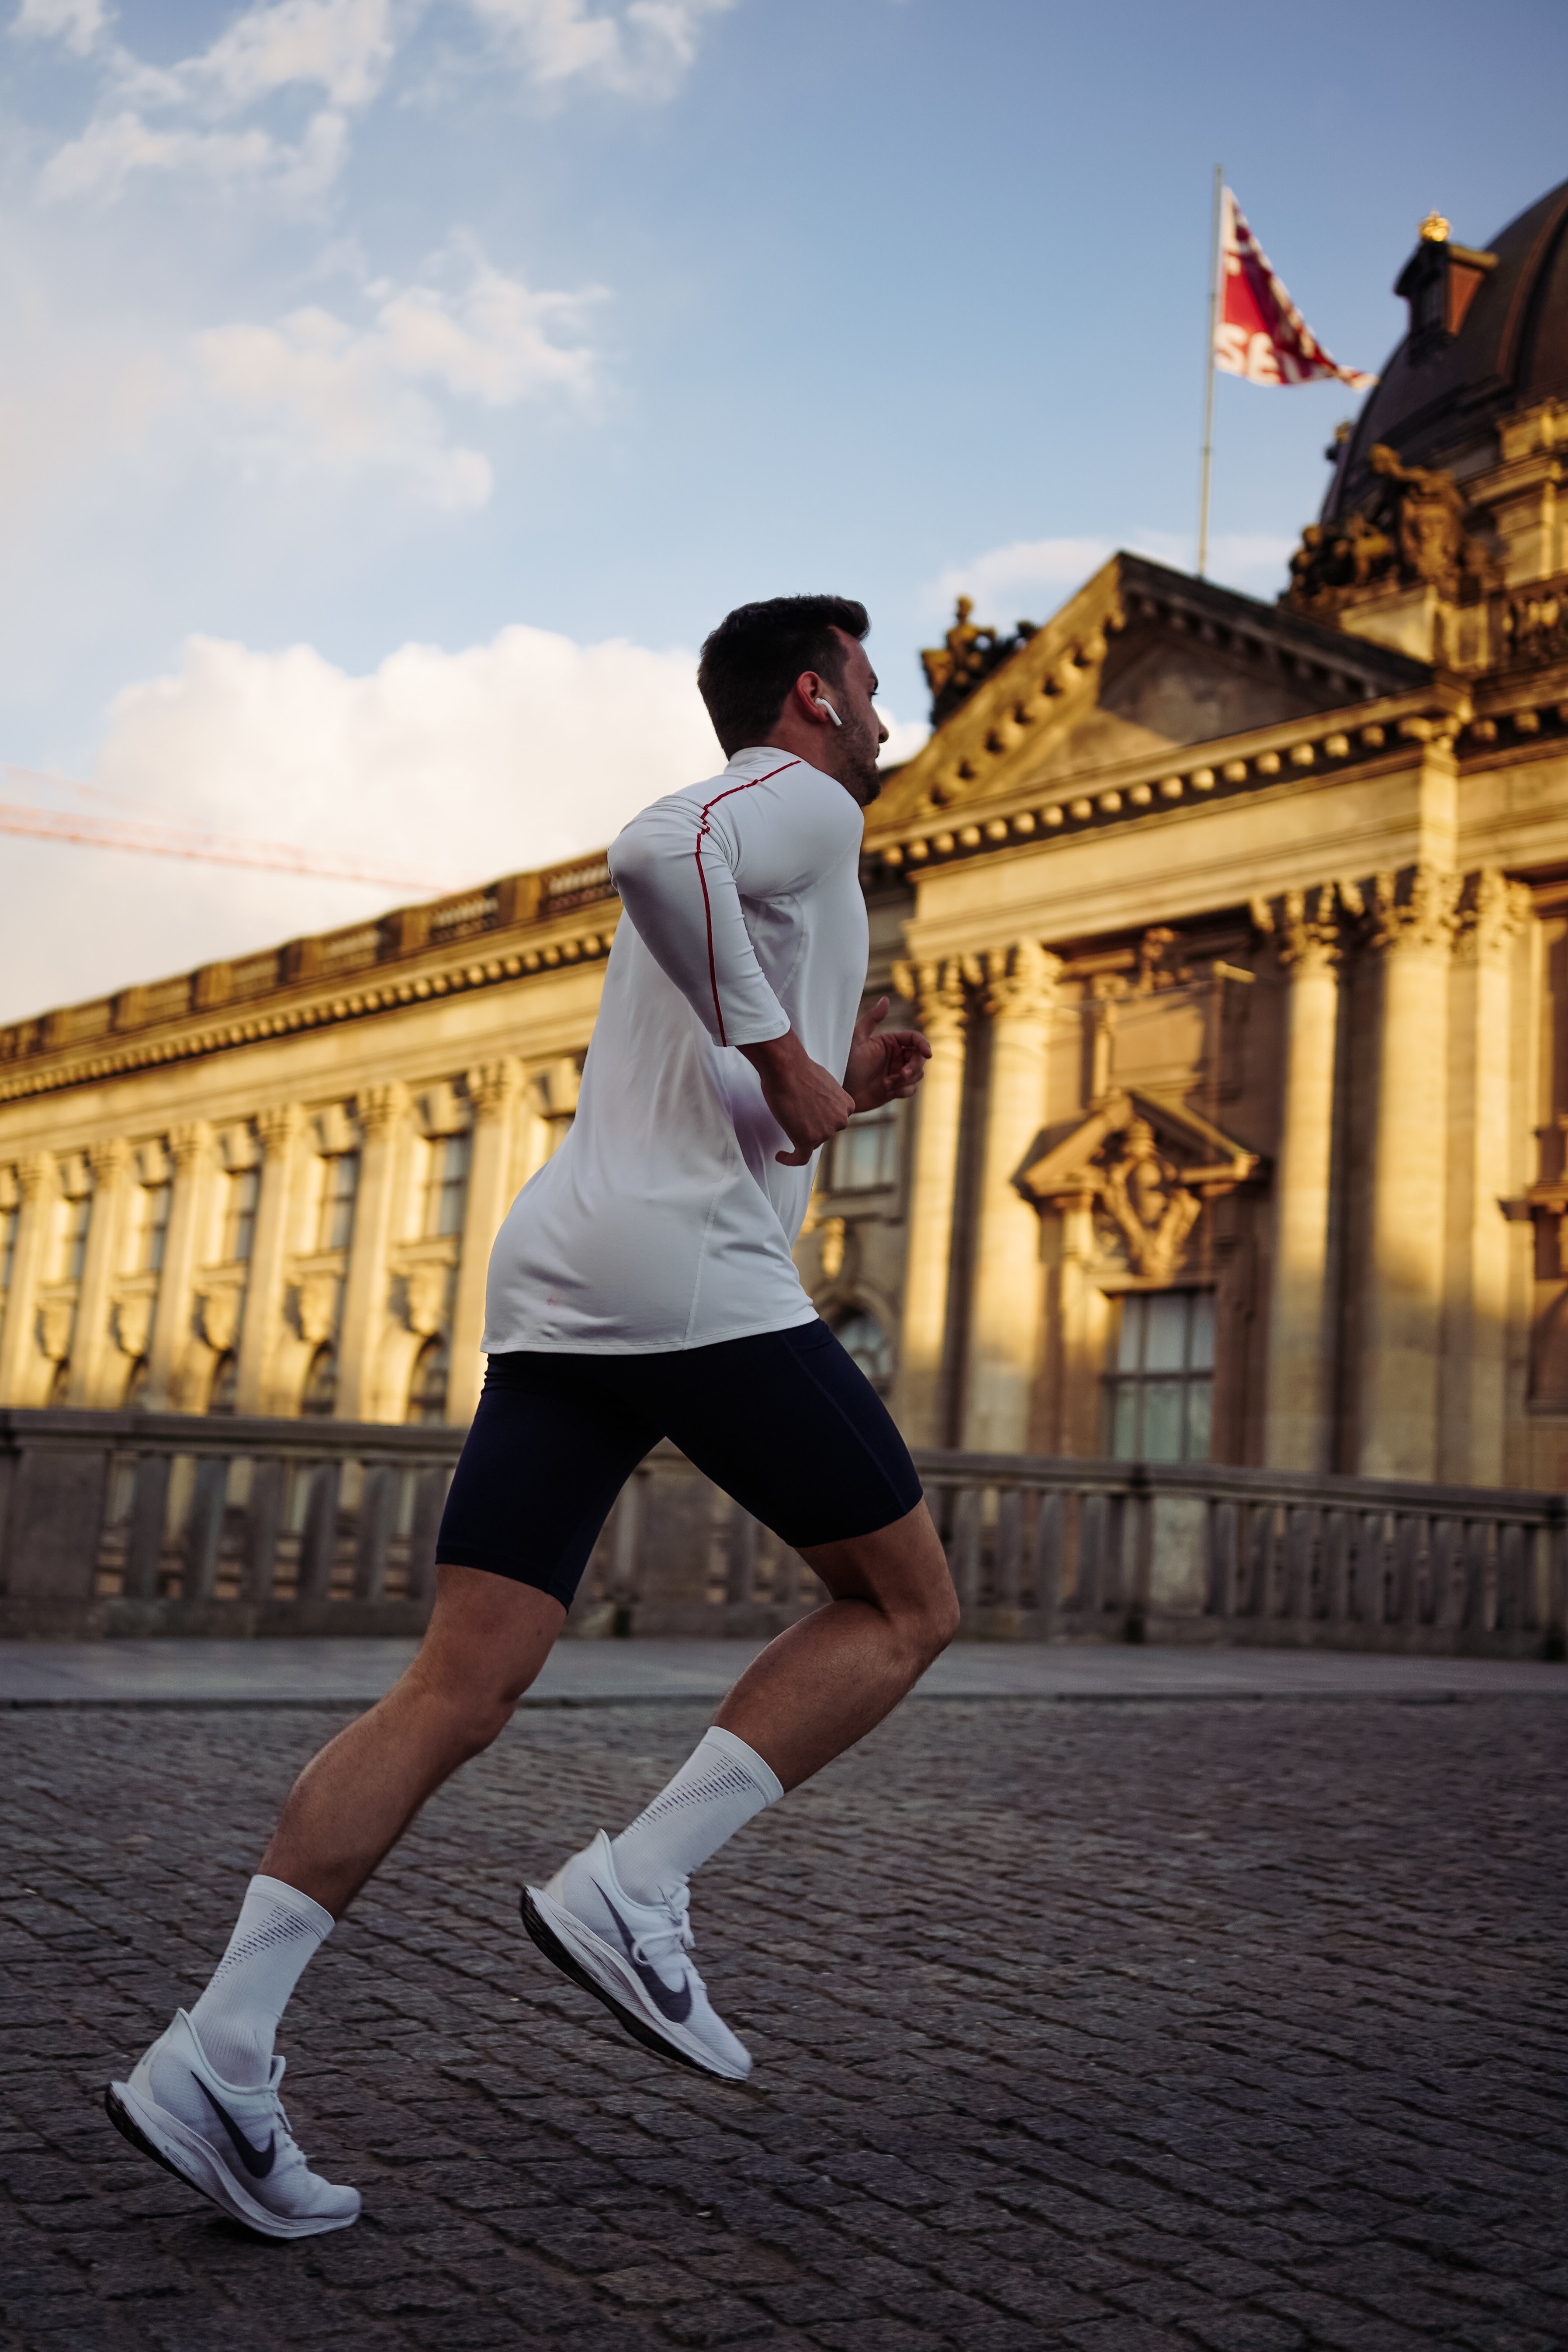 Music While Jogging - Tips for the Perfect Playlist